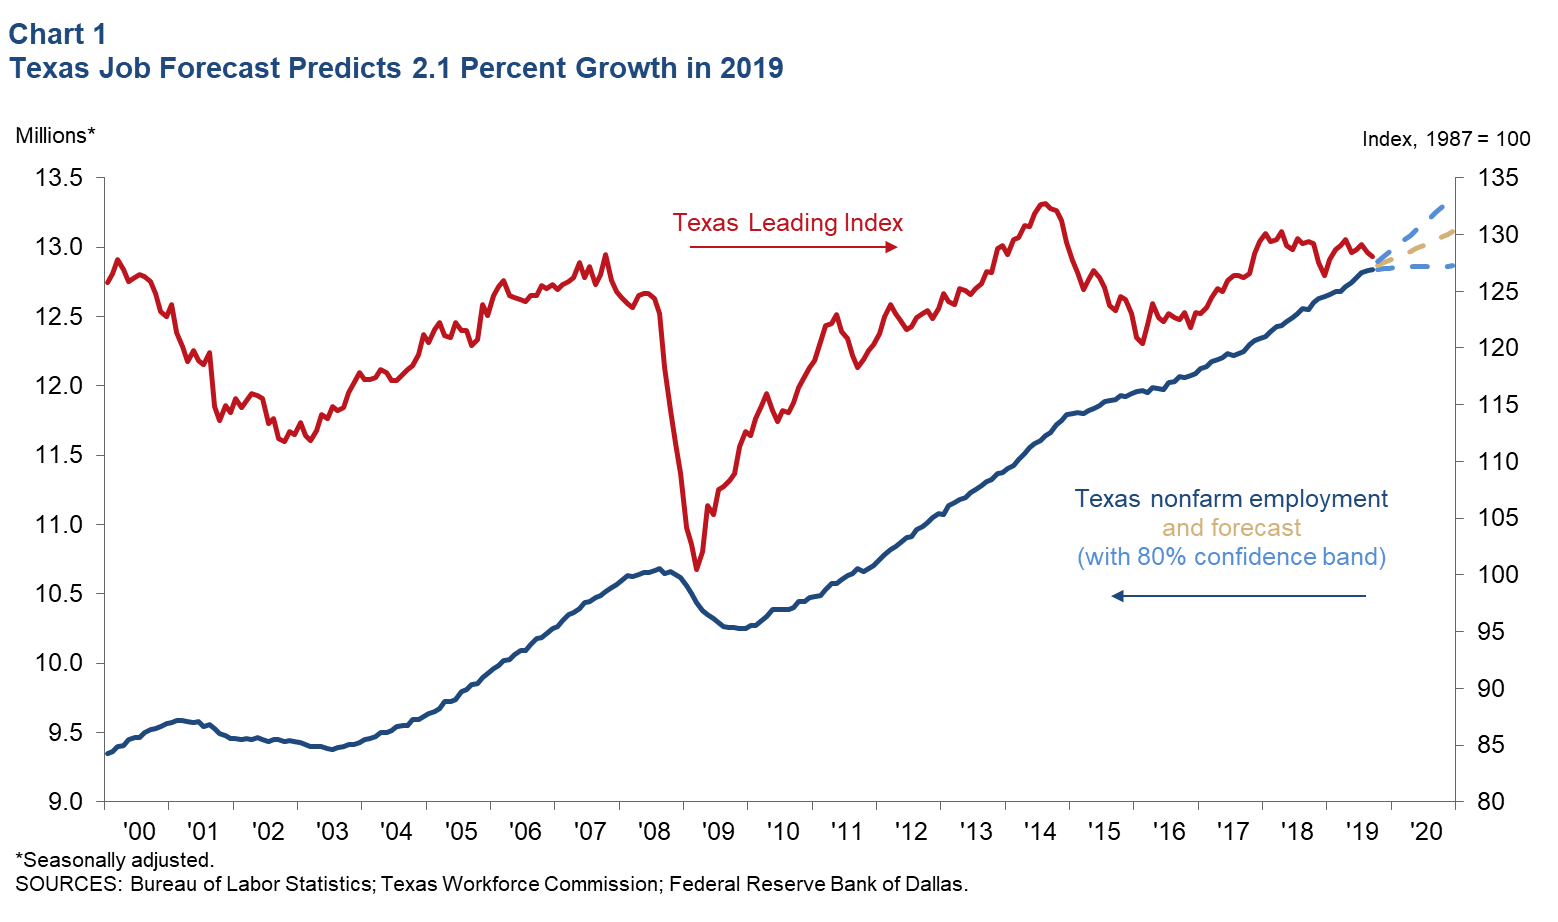 Texas Job Forecast Predicts 2.1 Percent Growth in 2019